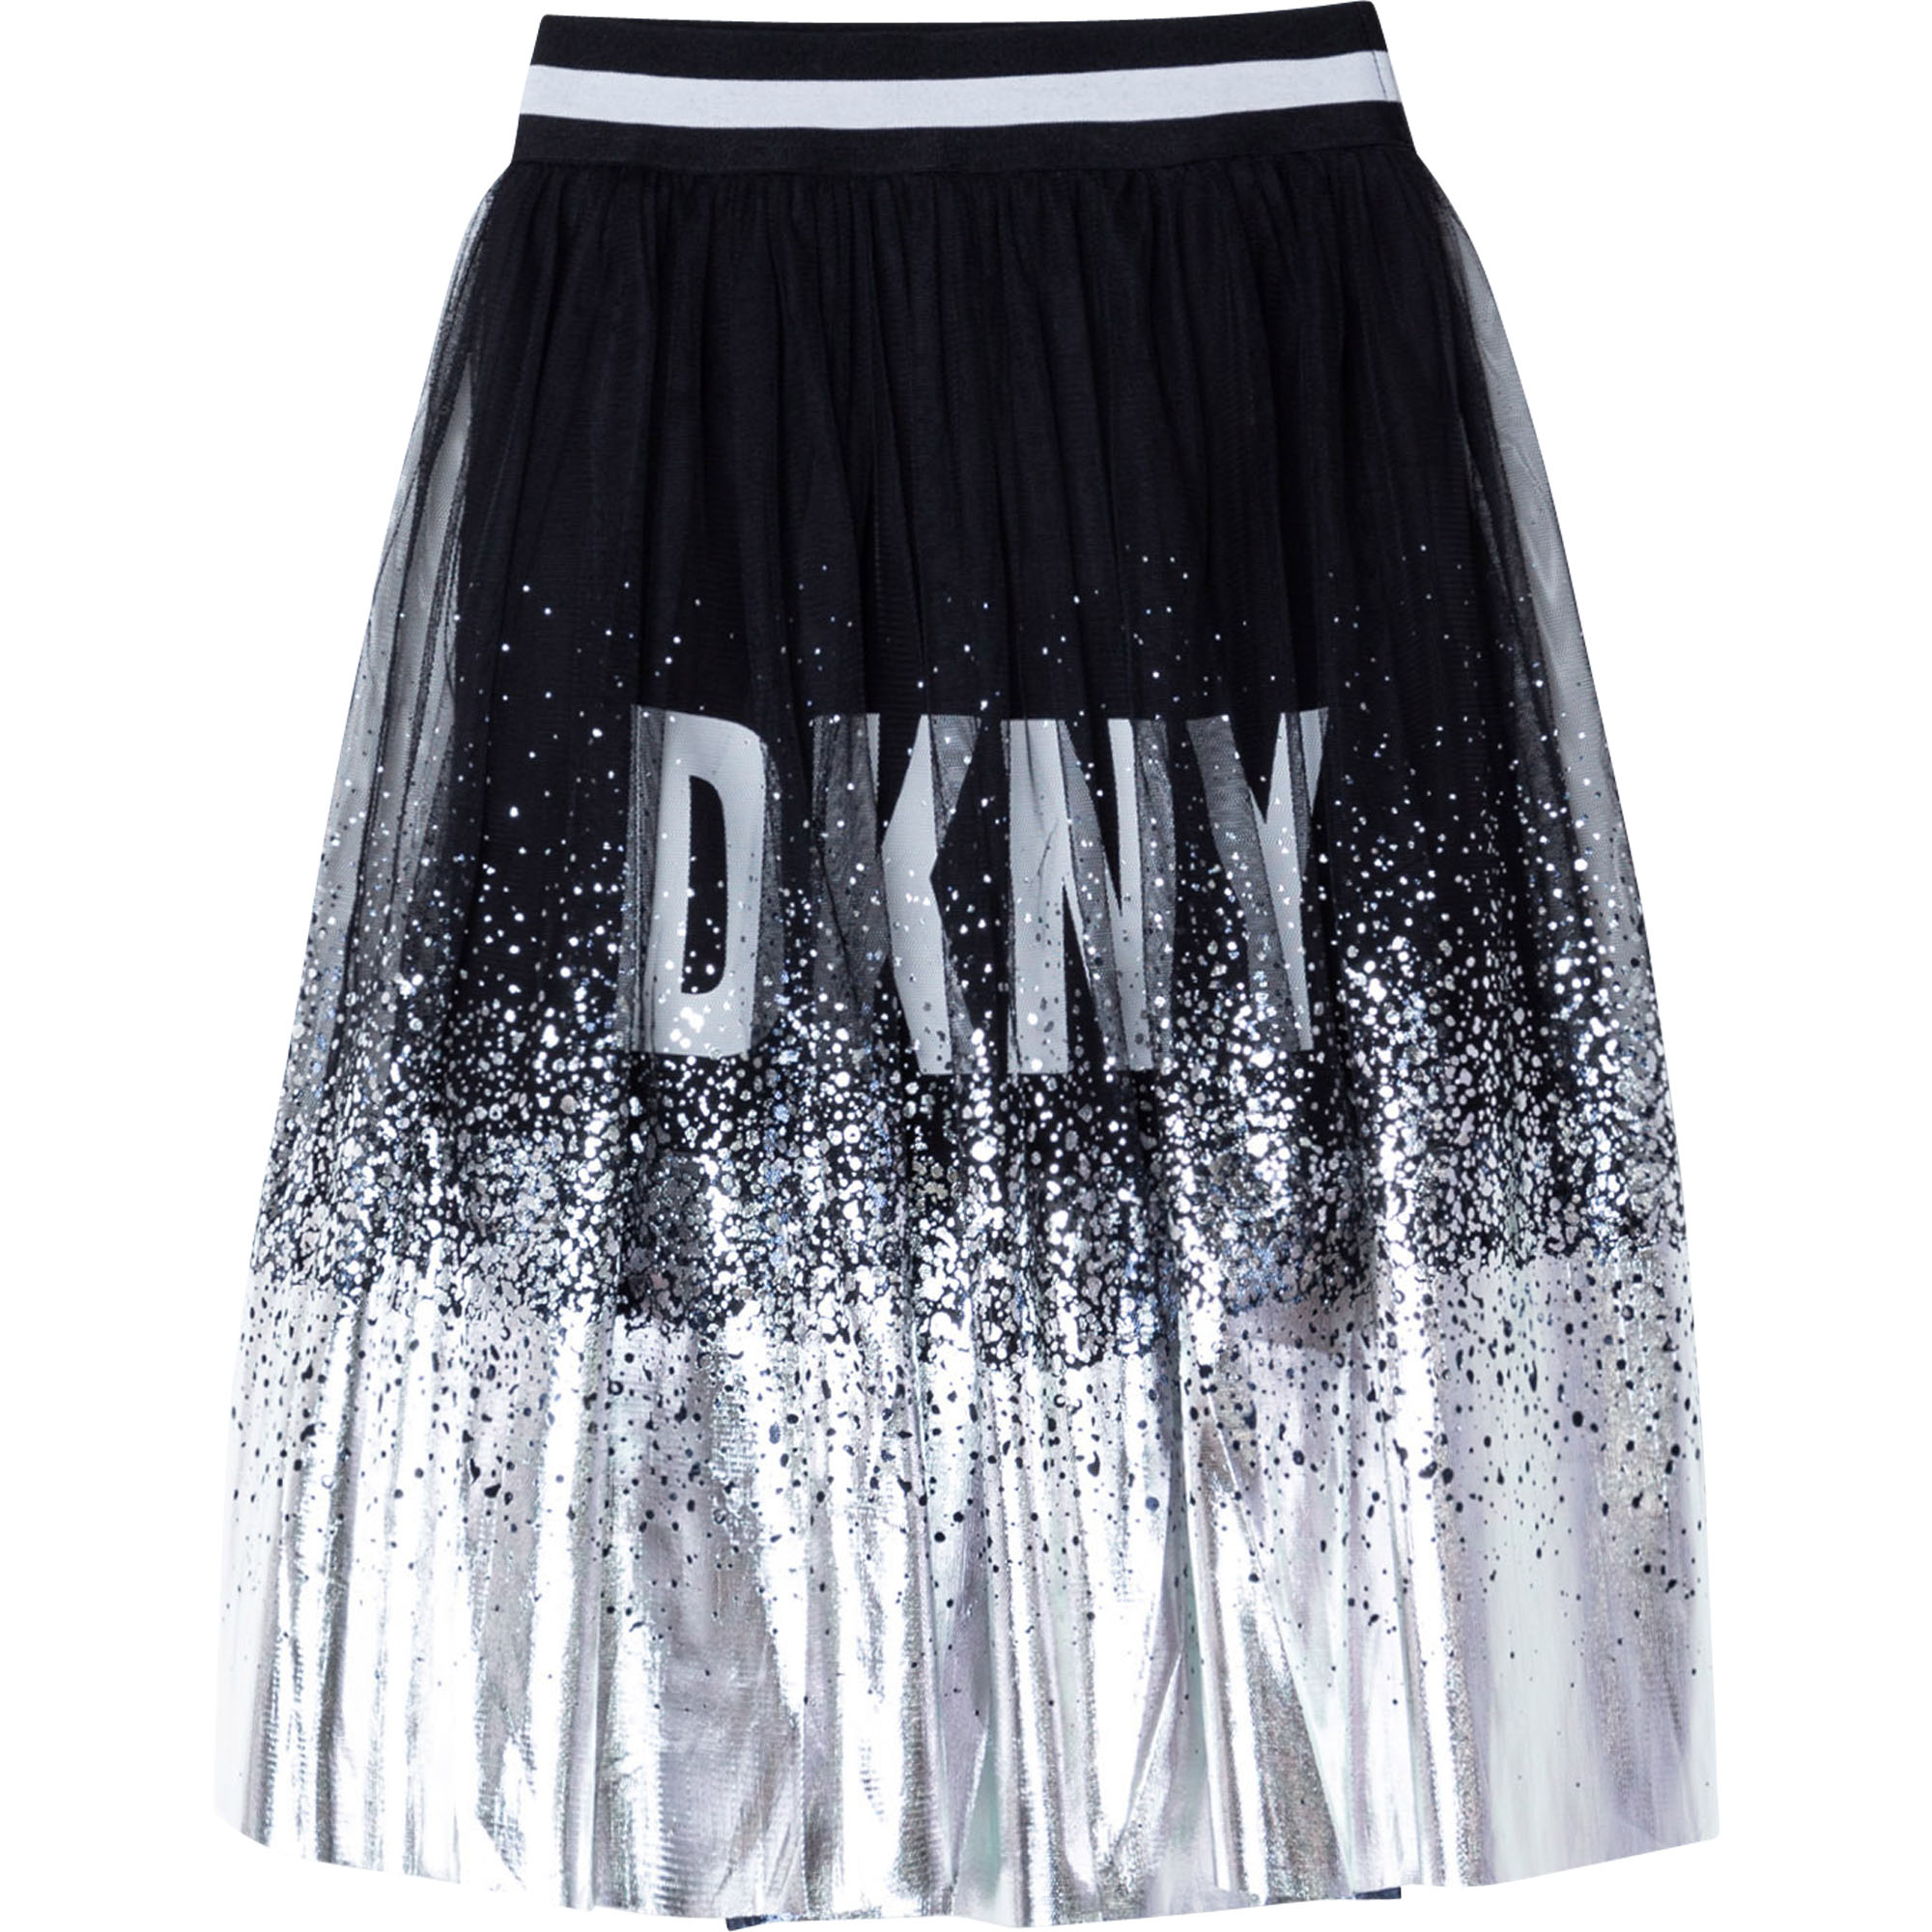 Gonna in tulle con stampa DKNY Per BAMBINA